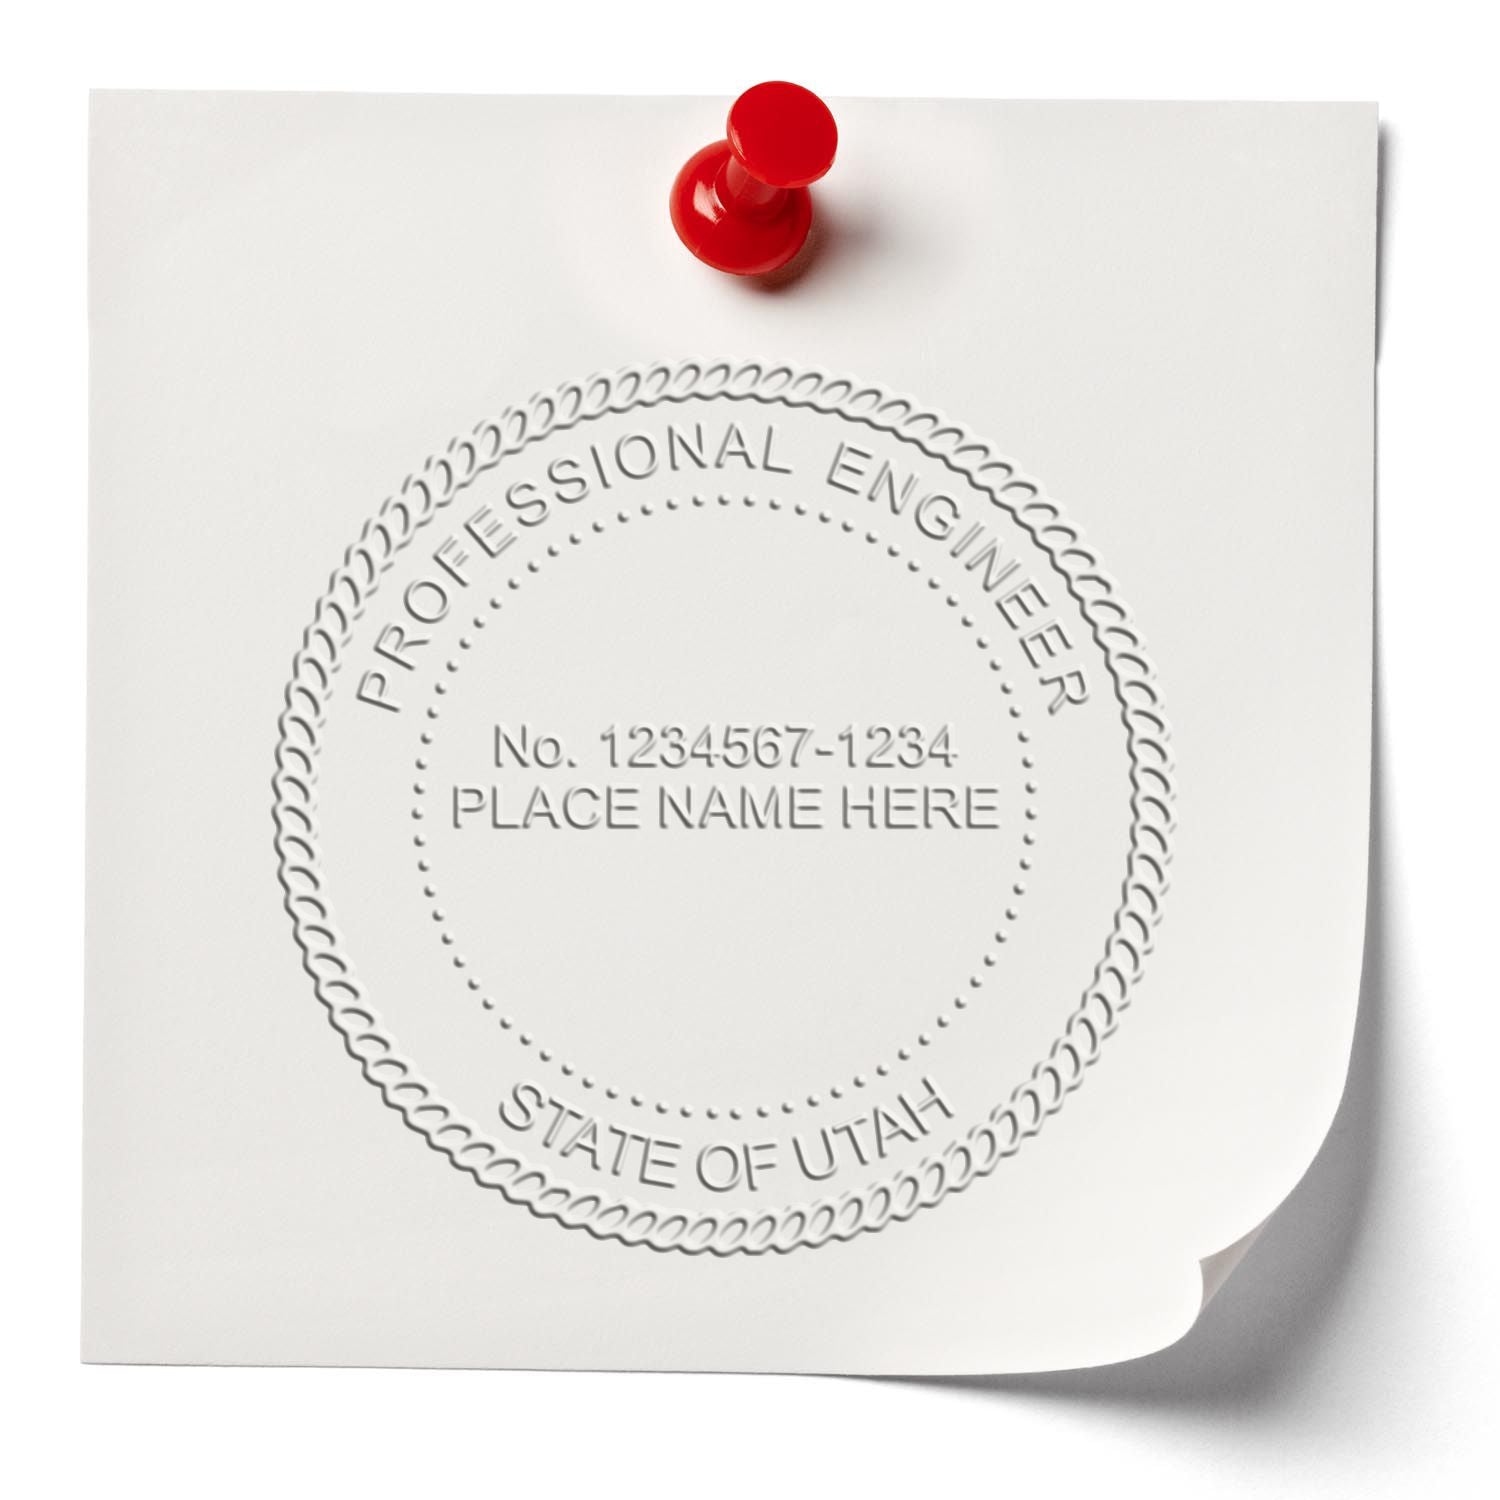 A lifestyle photo showing a stamped image of the Handheld Utah Professional Engineer Embosser on a piece of paper